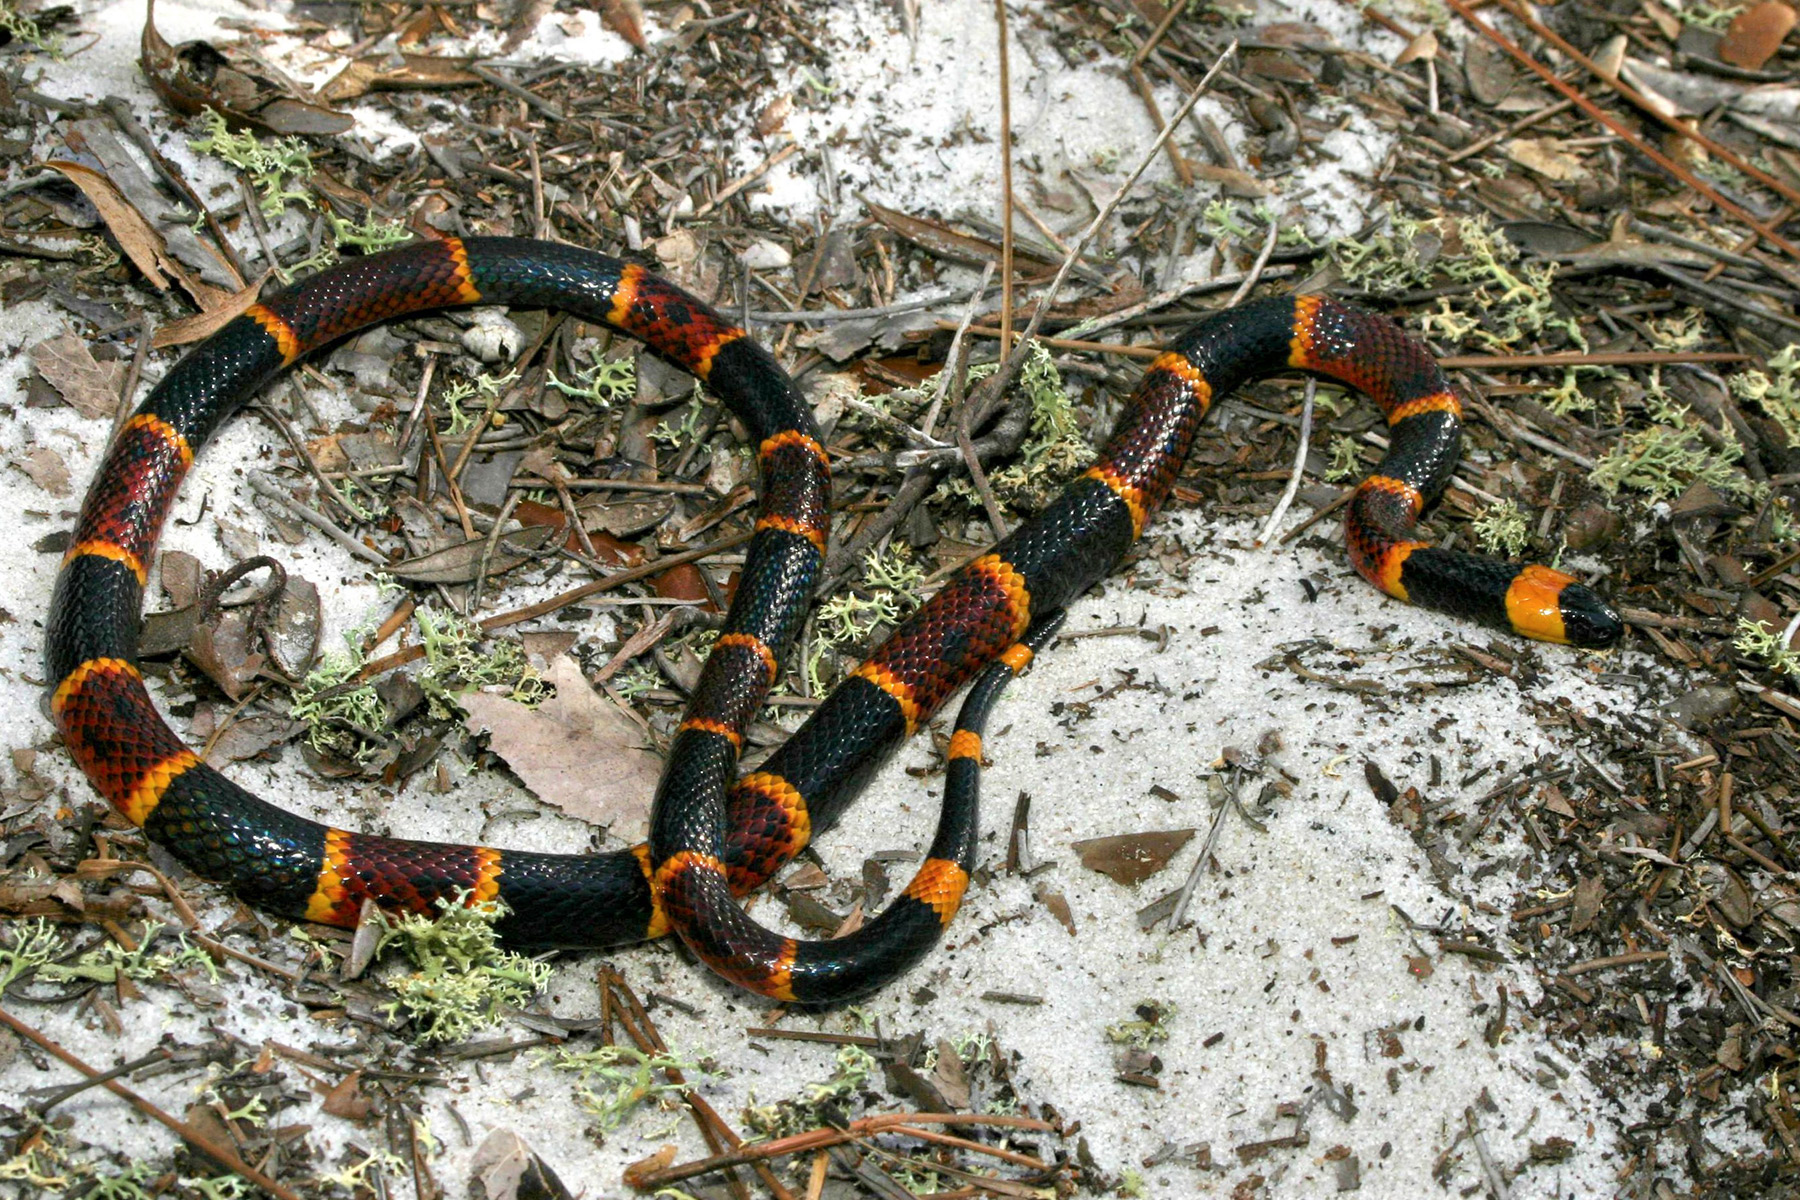 Coral Snake in Florida Everglades Holiday Park